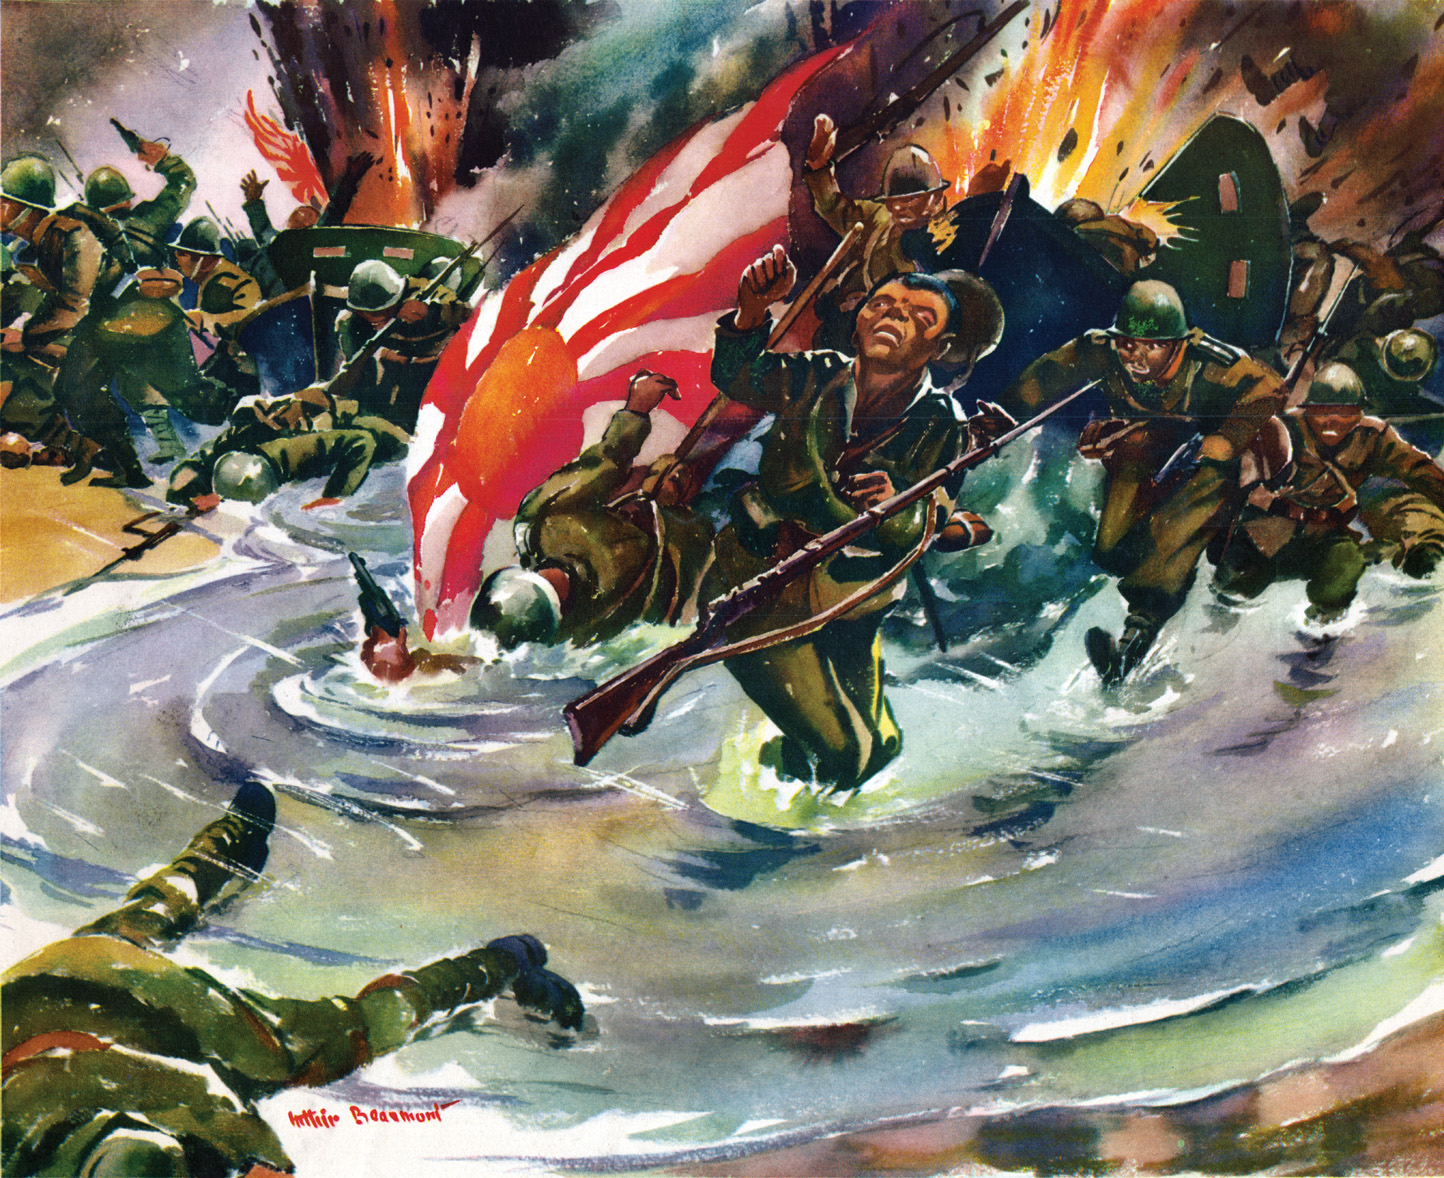 Beaumont’s depiction of Japanese soldiers being hit by volleys of defensive fire as they came ashore on December 22, 1941. Commander Cunningham then sent a message to Pearl Harbor: “Enemy on island, issue in doubt."